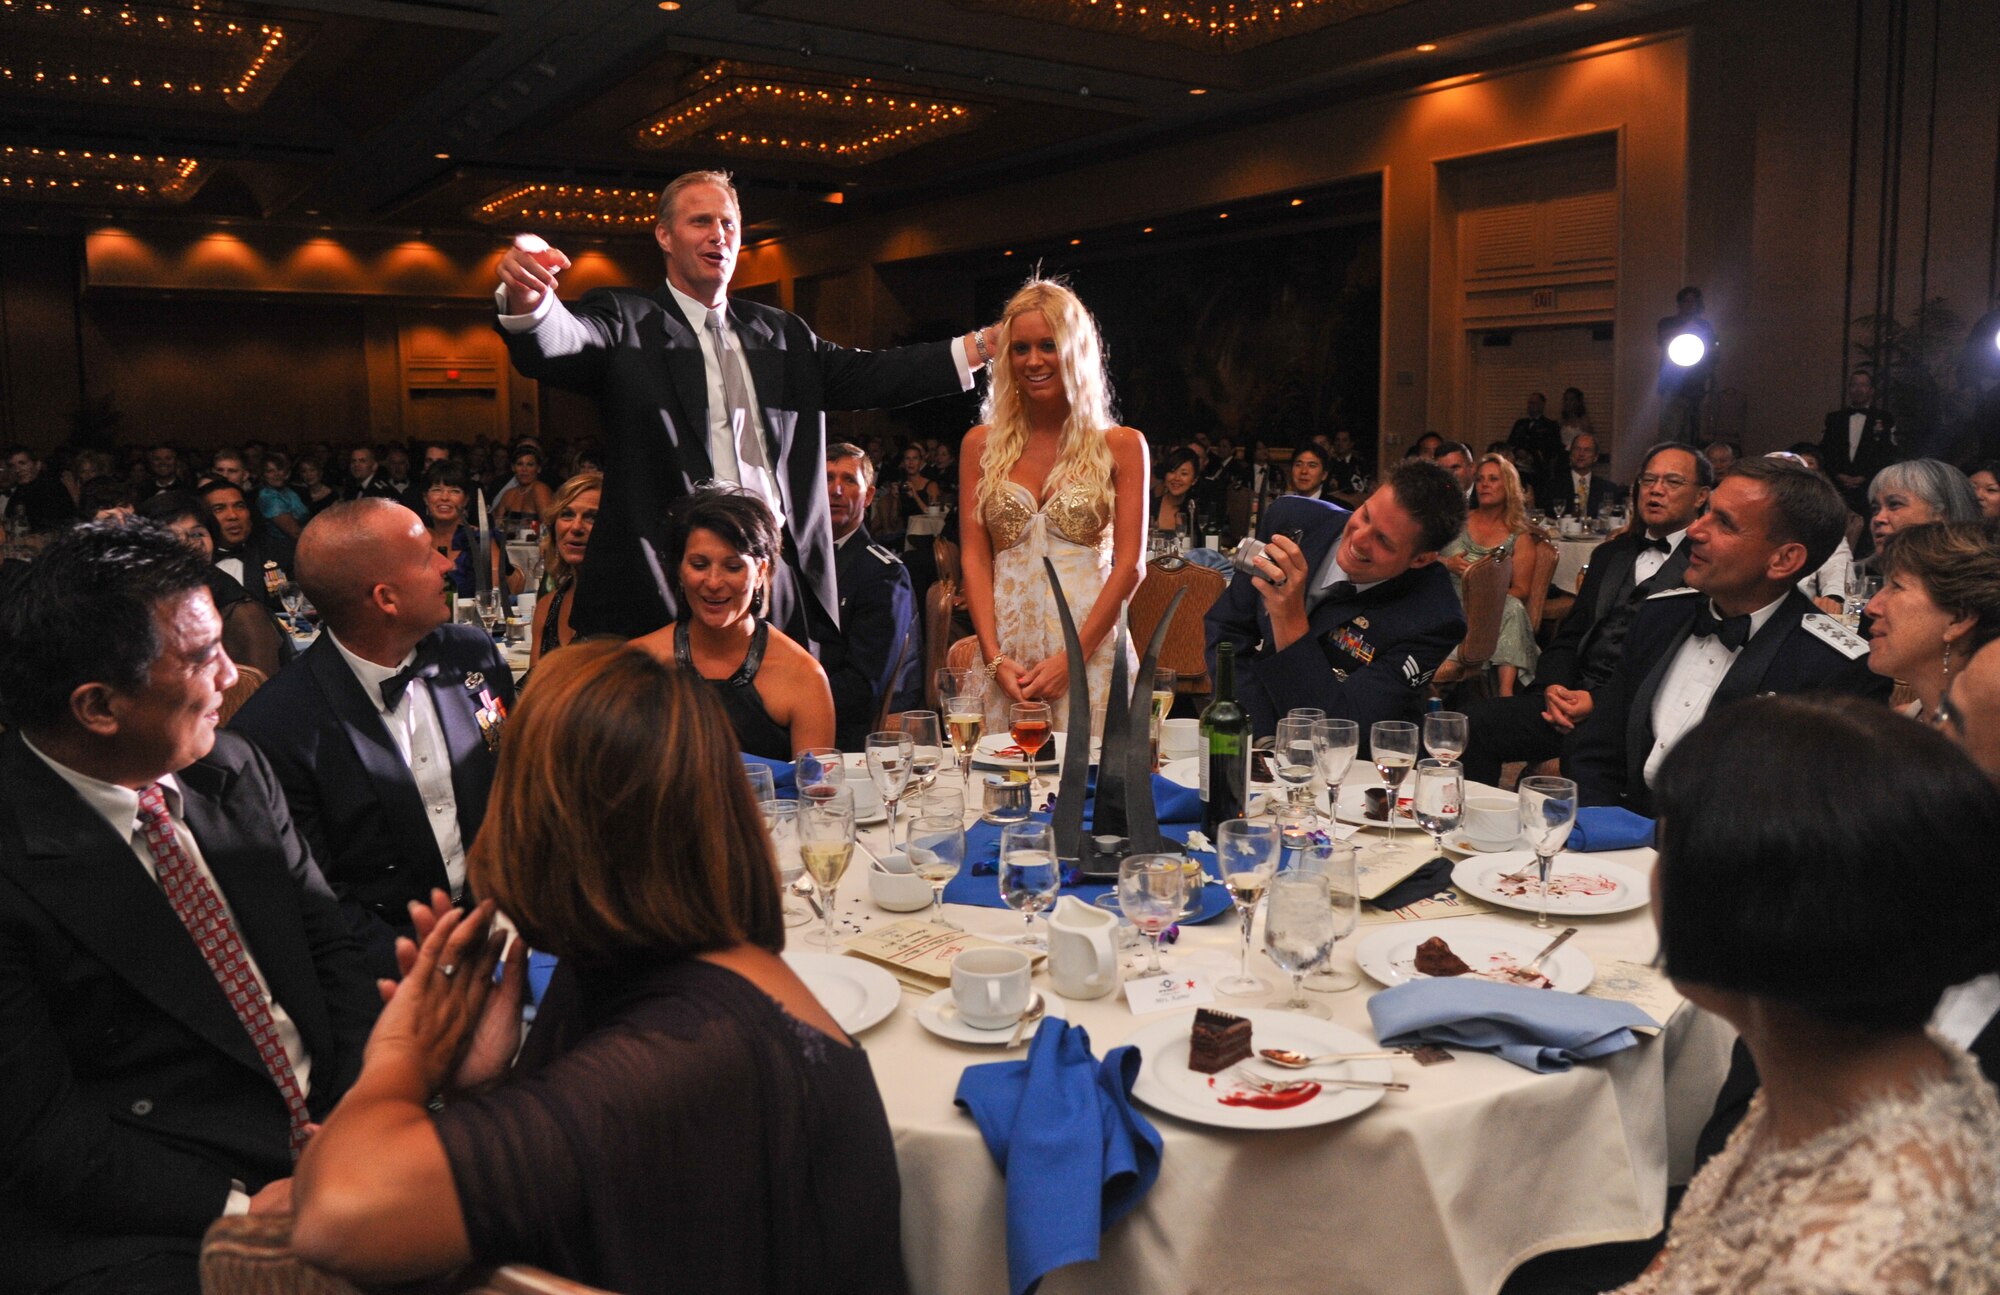 Chad Hennings, former A-10 Thunderbolt II pilot and Dallas Cowboys defensive lineman (left), sings “Happy Birthday” to Ashely Kolfage, wife of Senior Airman Brian Kolfage (right), at the 64th Annual Air Force Ball, held at the Hilton Hawaiian Village in Waikiki, Sept. 16. Brian Kolfage, a triple amputee from Operation Iraqi Freedom, was the guest of honor at the ball. (U.S. Air Force photo/Senior Airman Lauren Main)